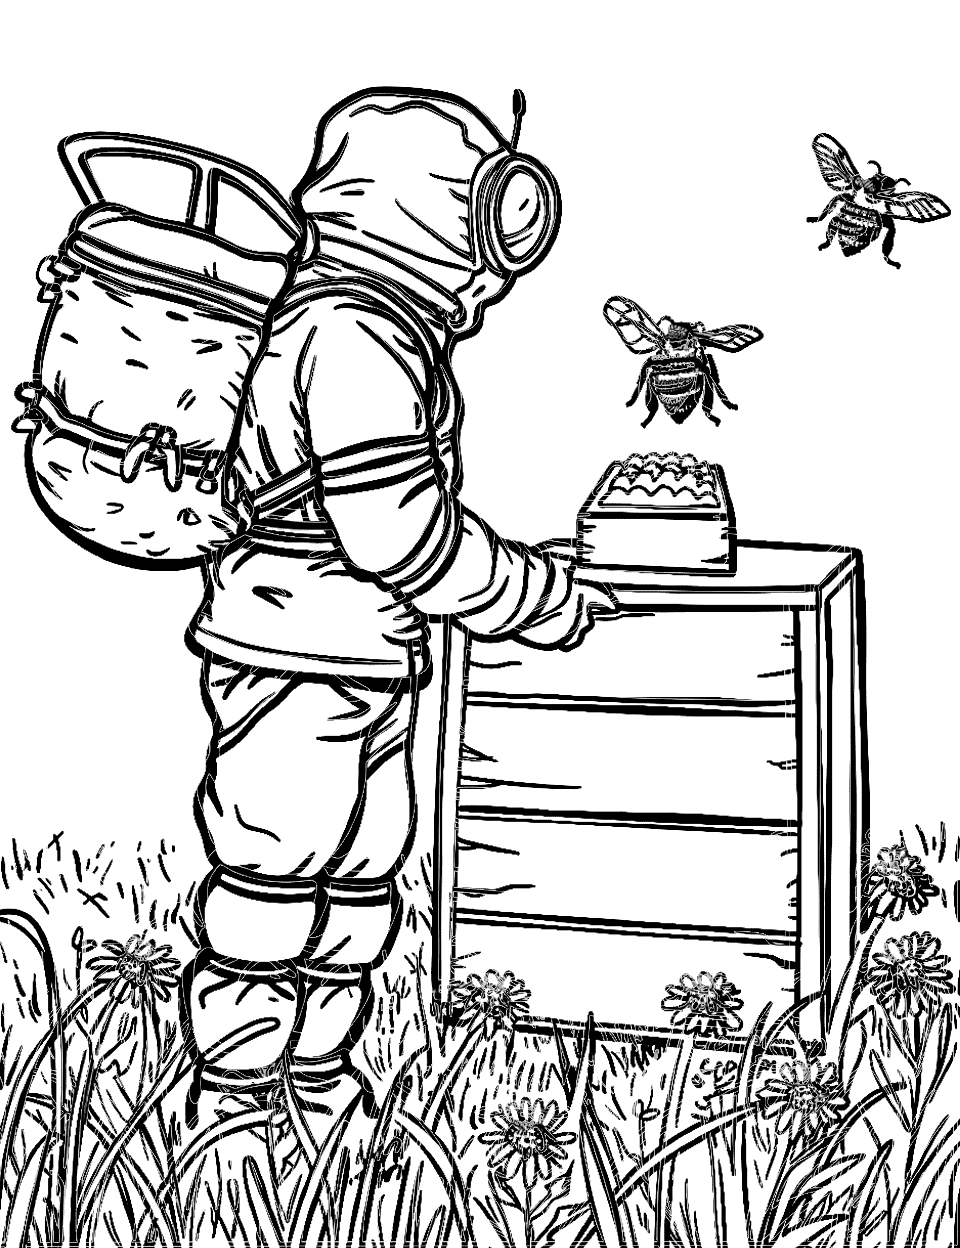 Beekeeper at Work Bee Coloring Page - A beekeeper in protective gear tending to beehives in a field.